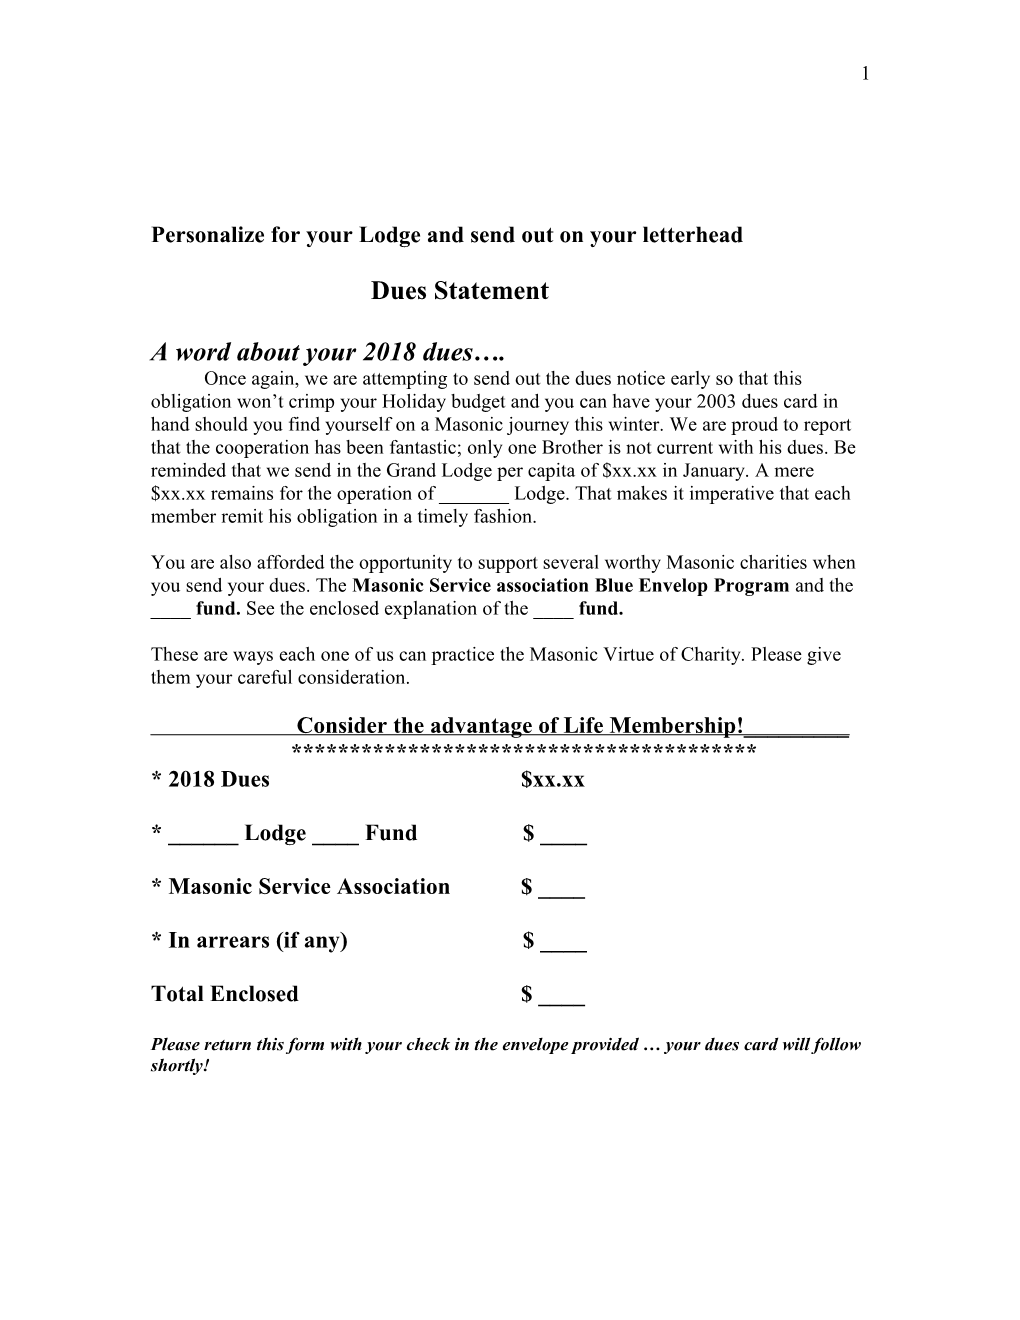 Personalize for Your Lodge and Send out on Your Letterhead